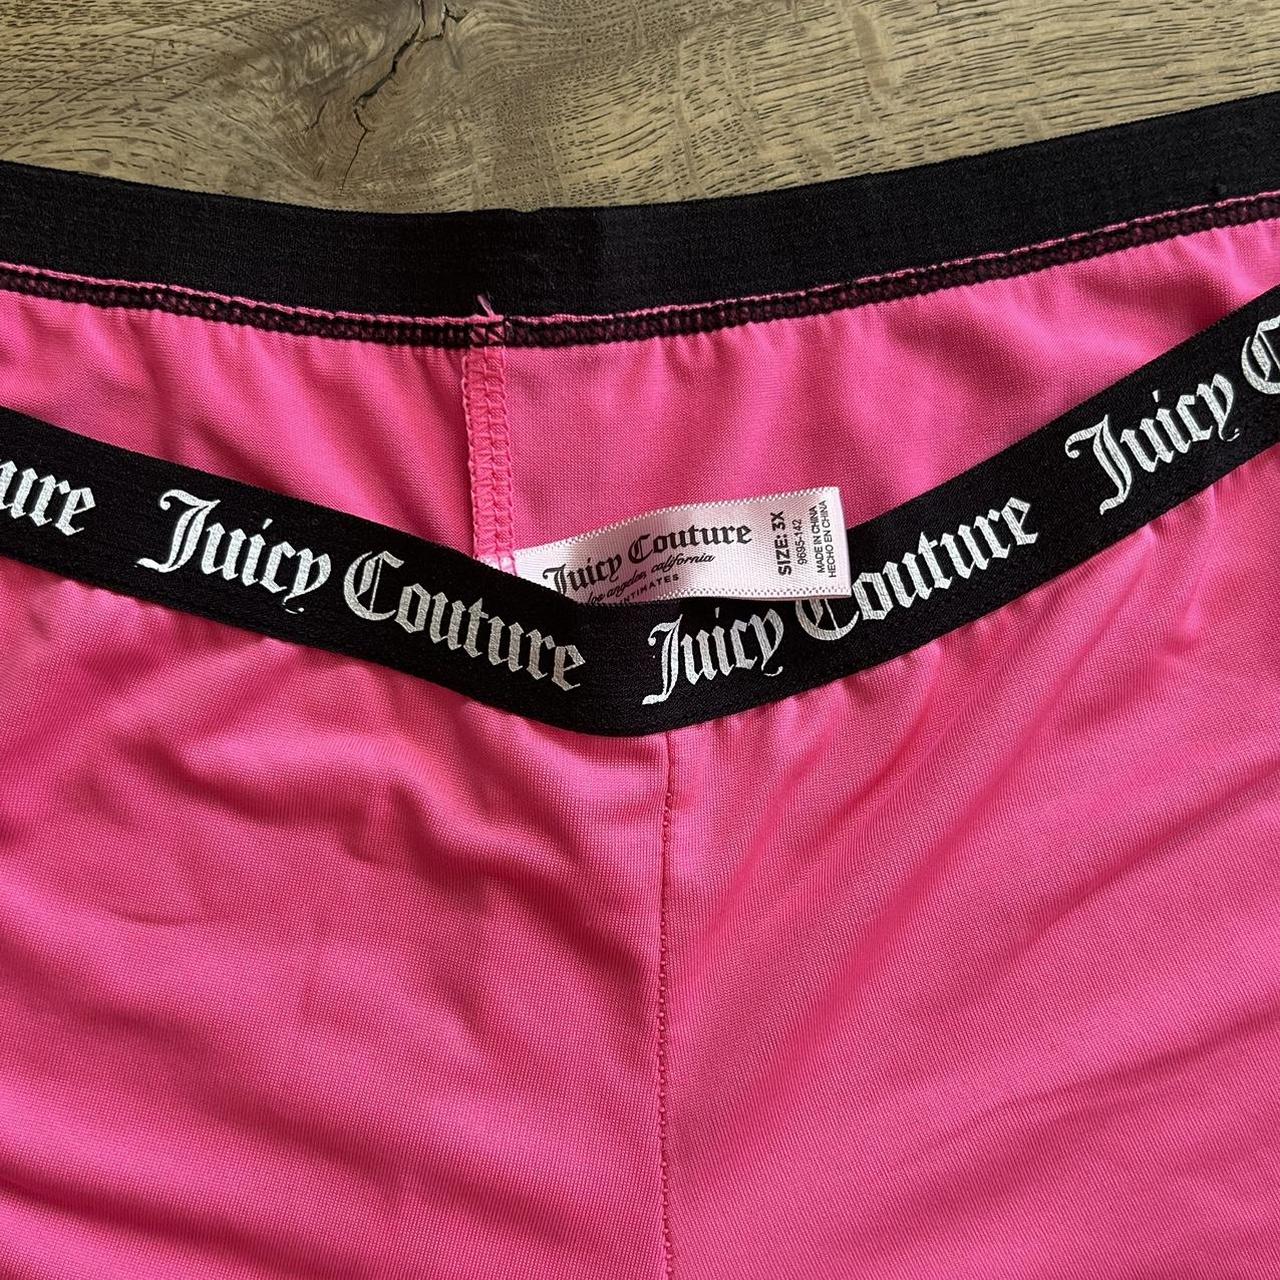 juicy couture boyshort boxers🩷 hot pink with a black... - Depop